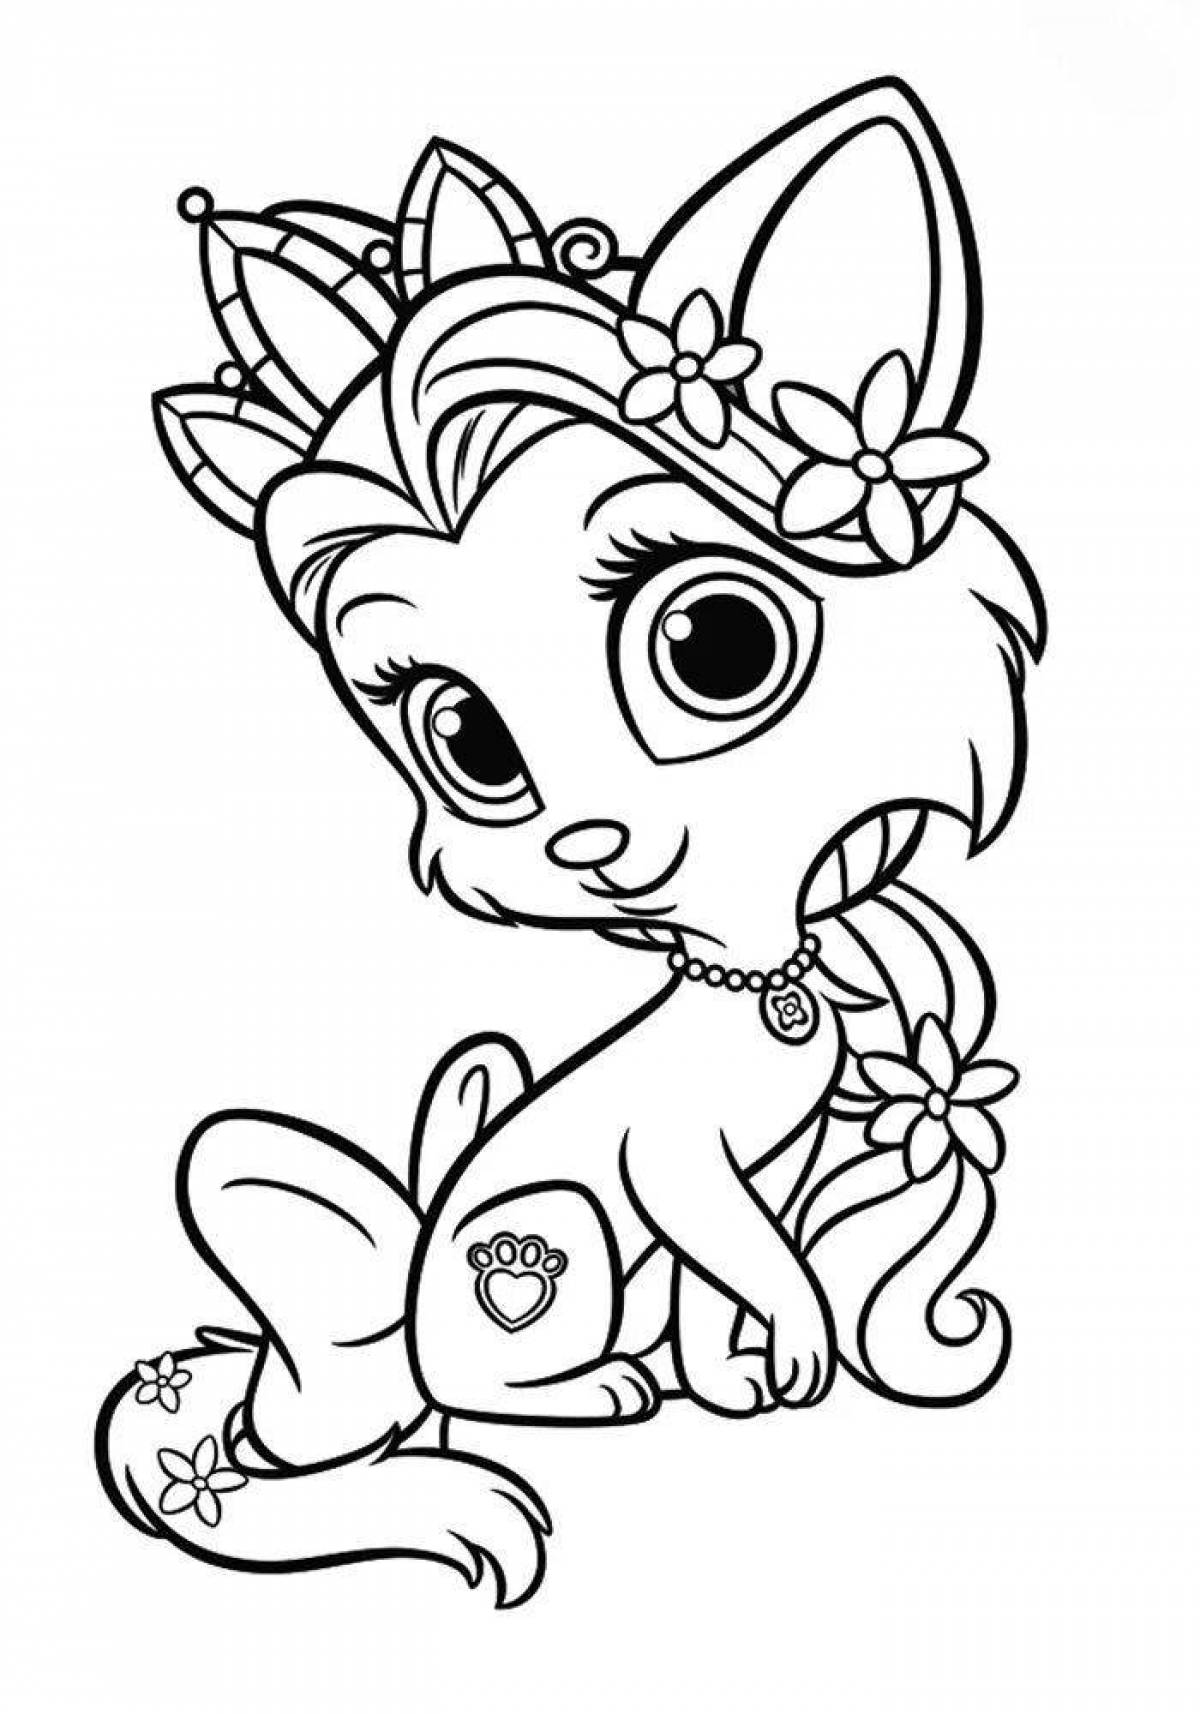 Live coloring little animals for girls